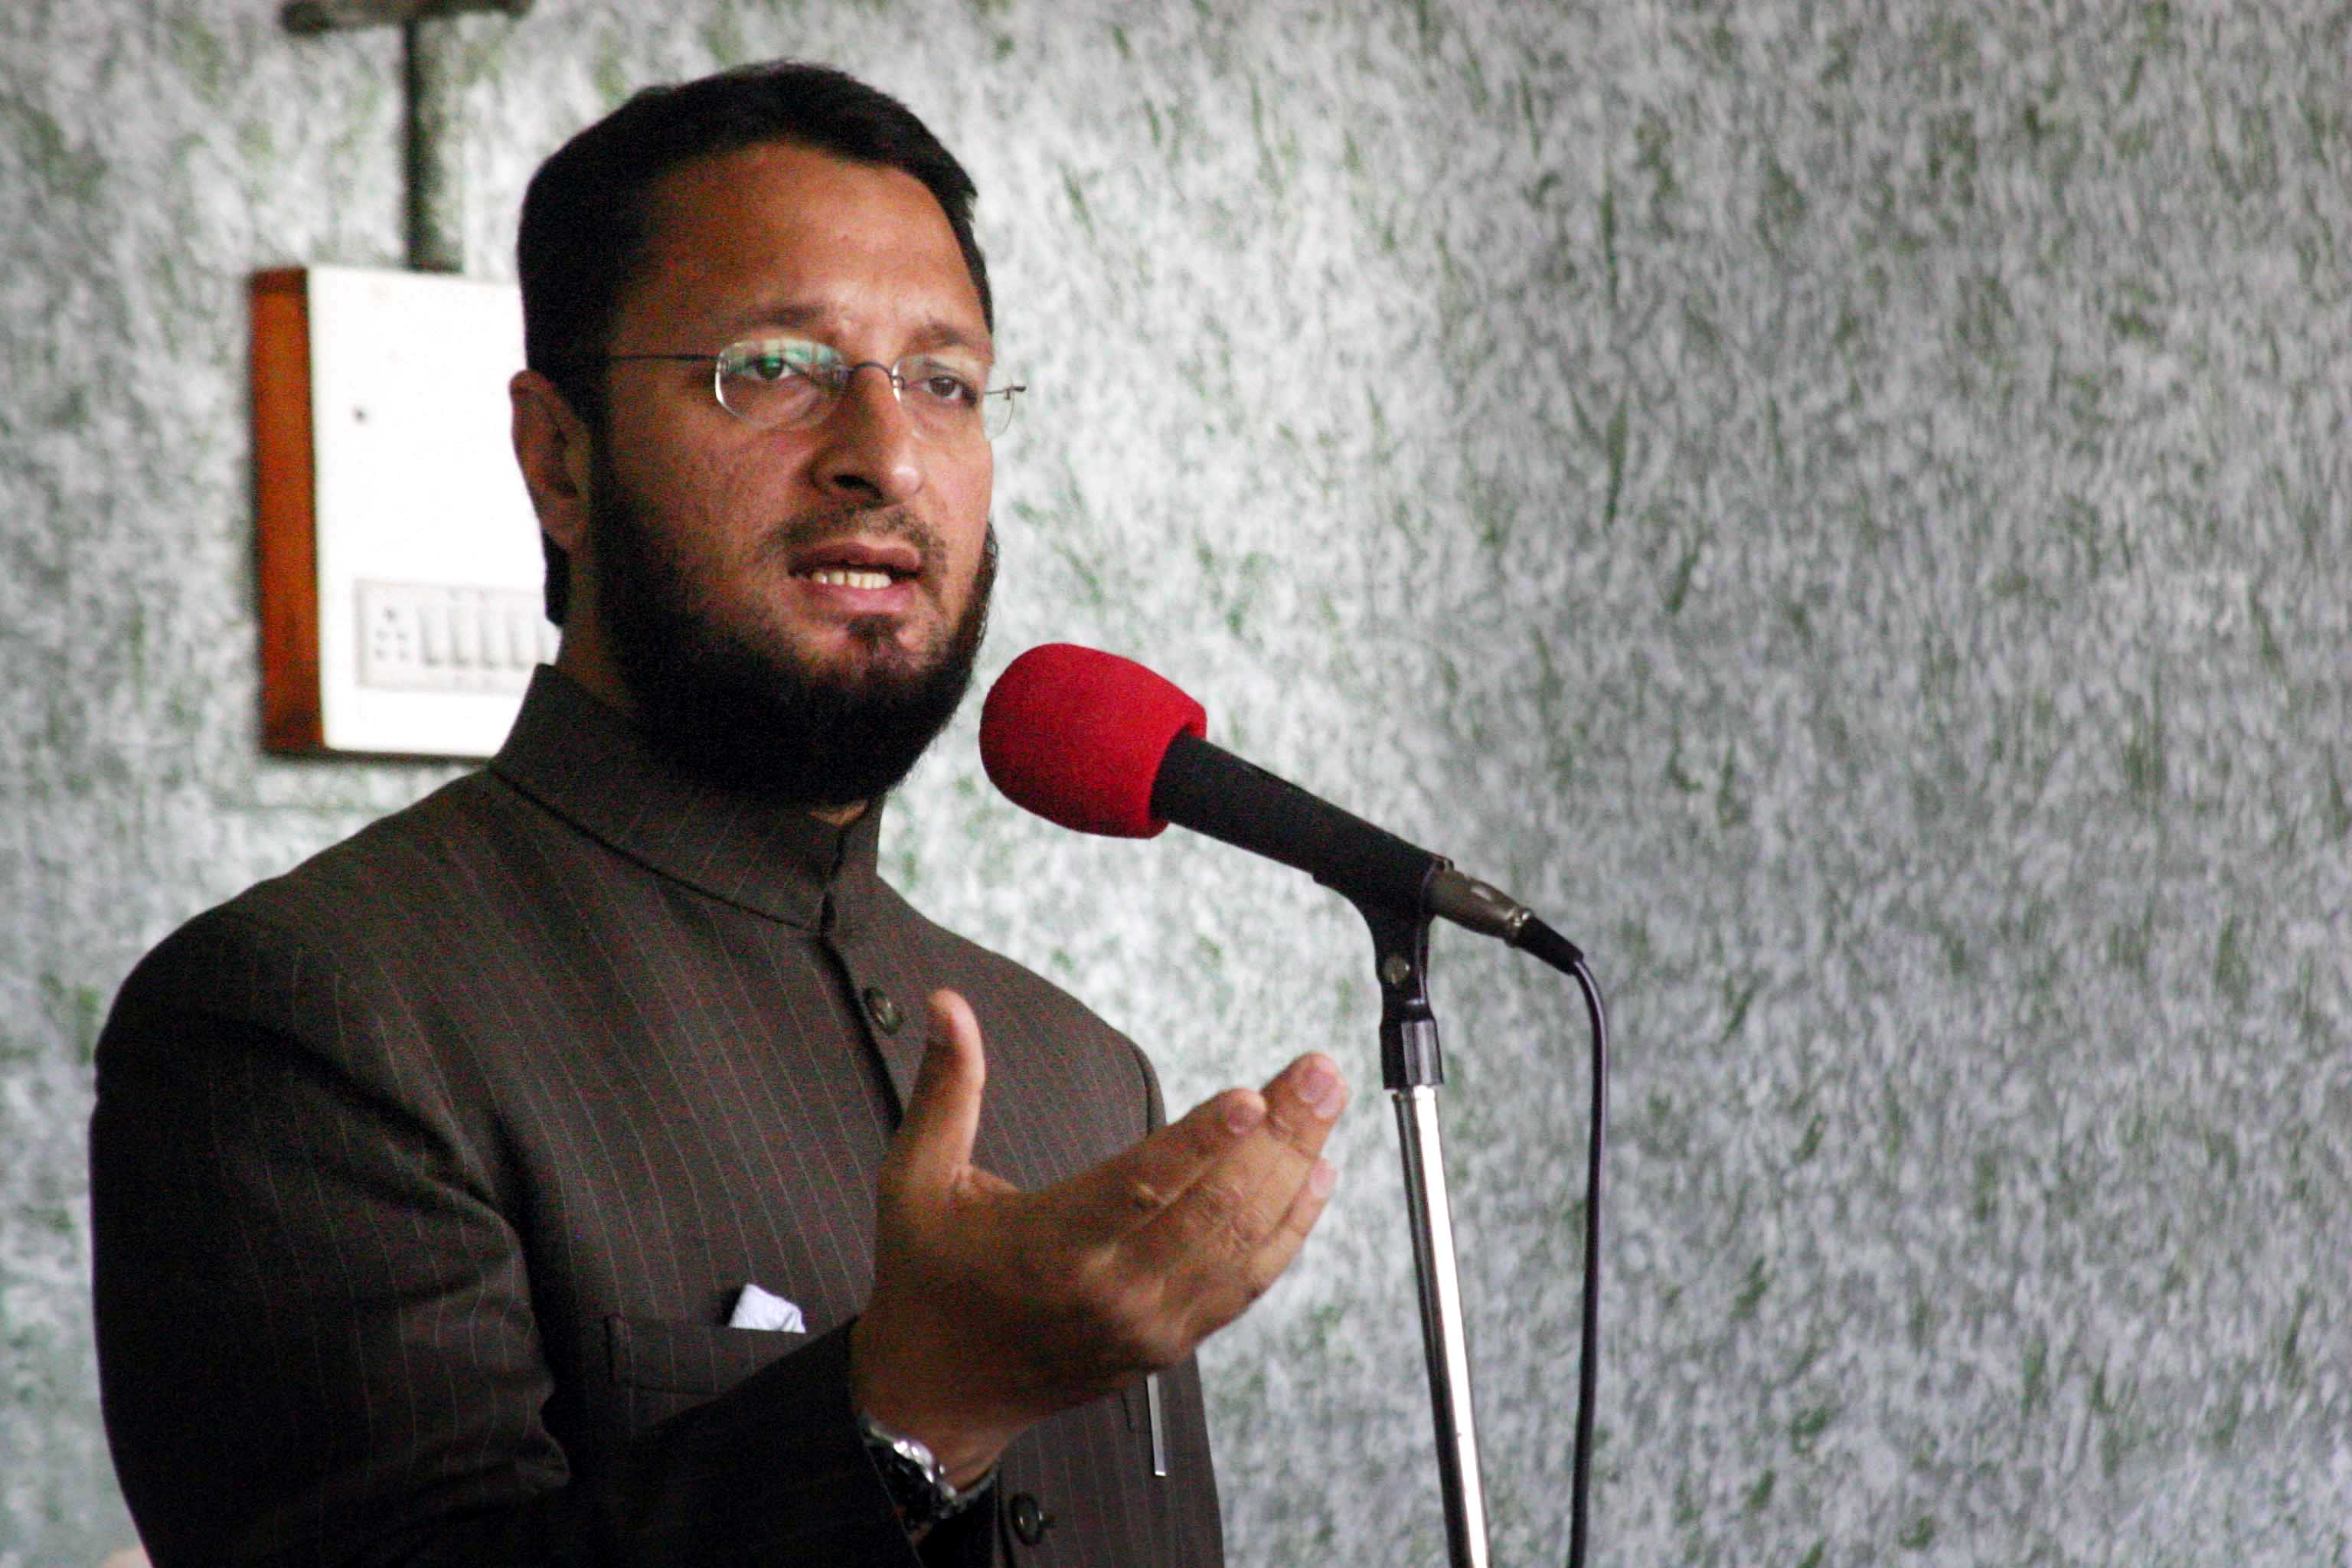 Not worried of getting branded as person who gives hate speeches, claims Owaisi